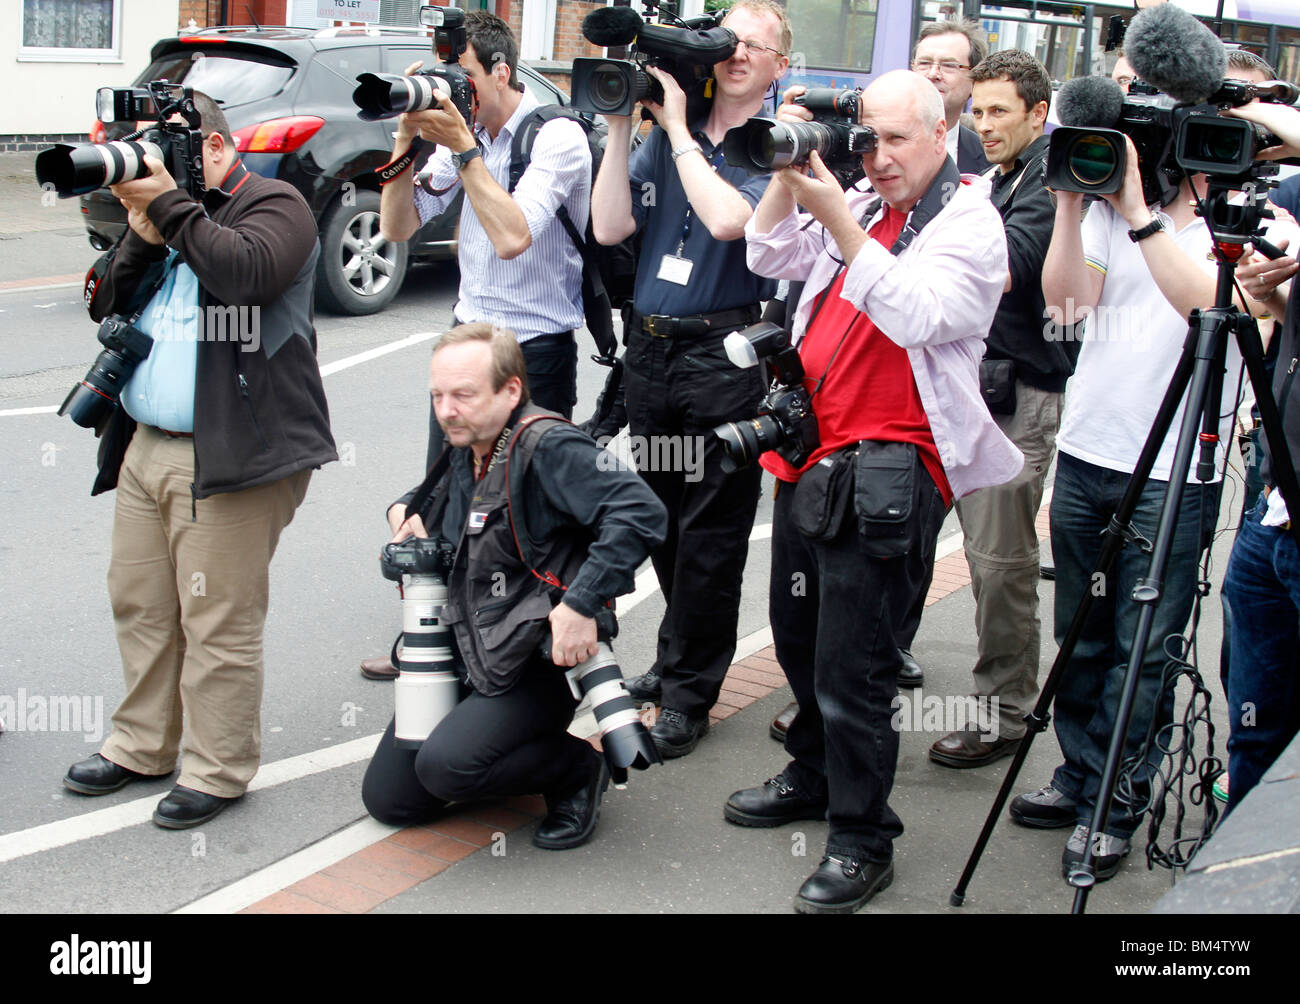 The Press pack. Photographers everywhere. Ed Balls announces his plans to stand for Labour Leadership. Stock Photo